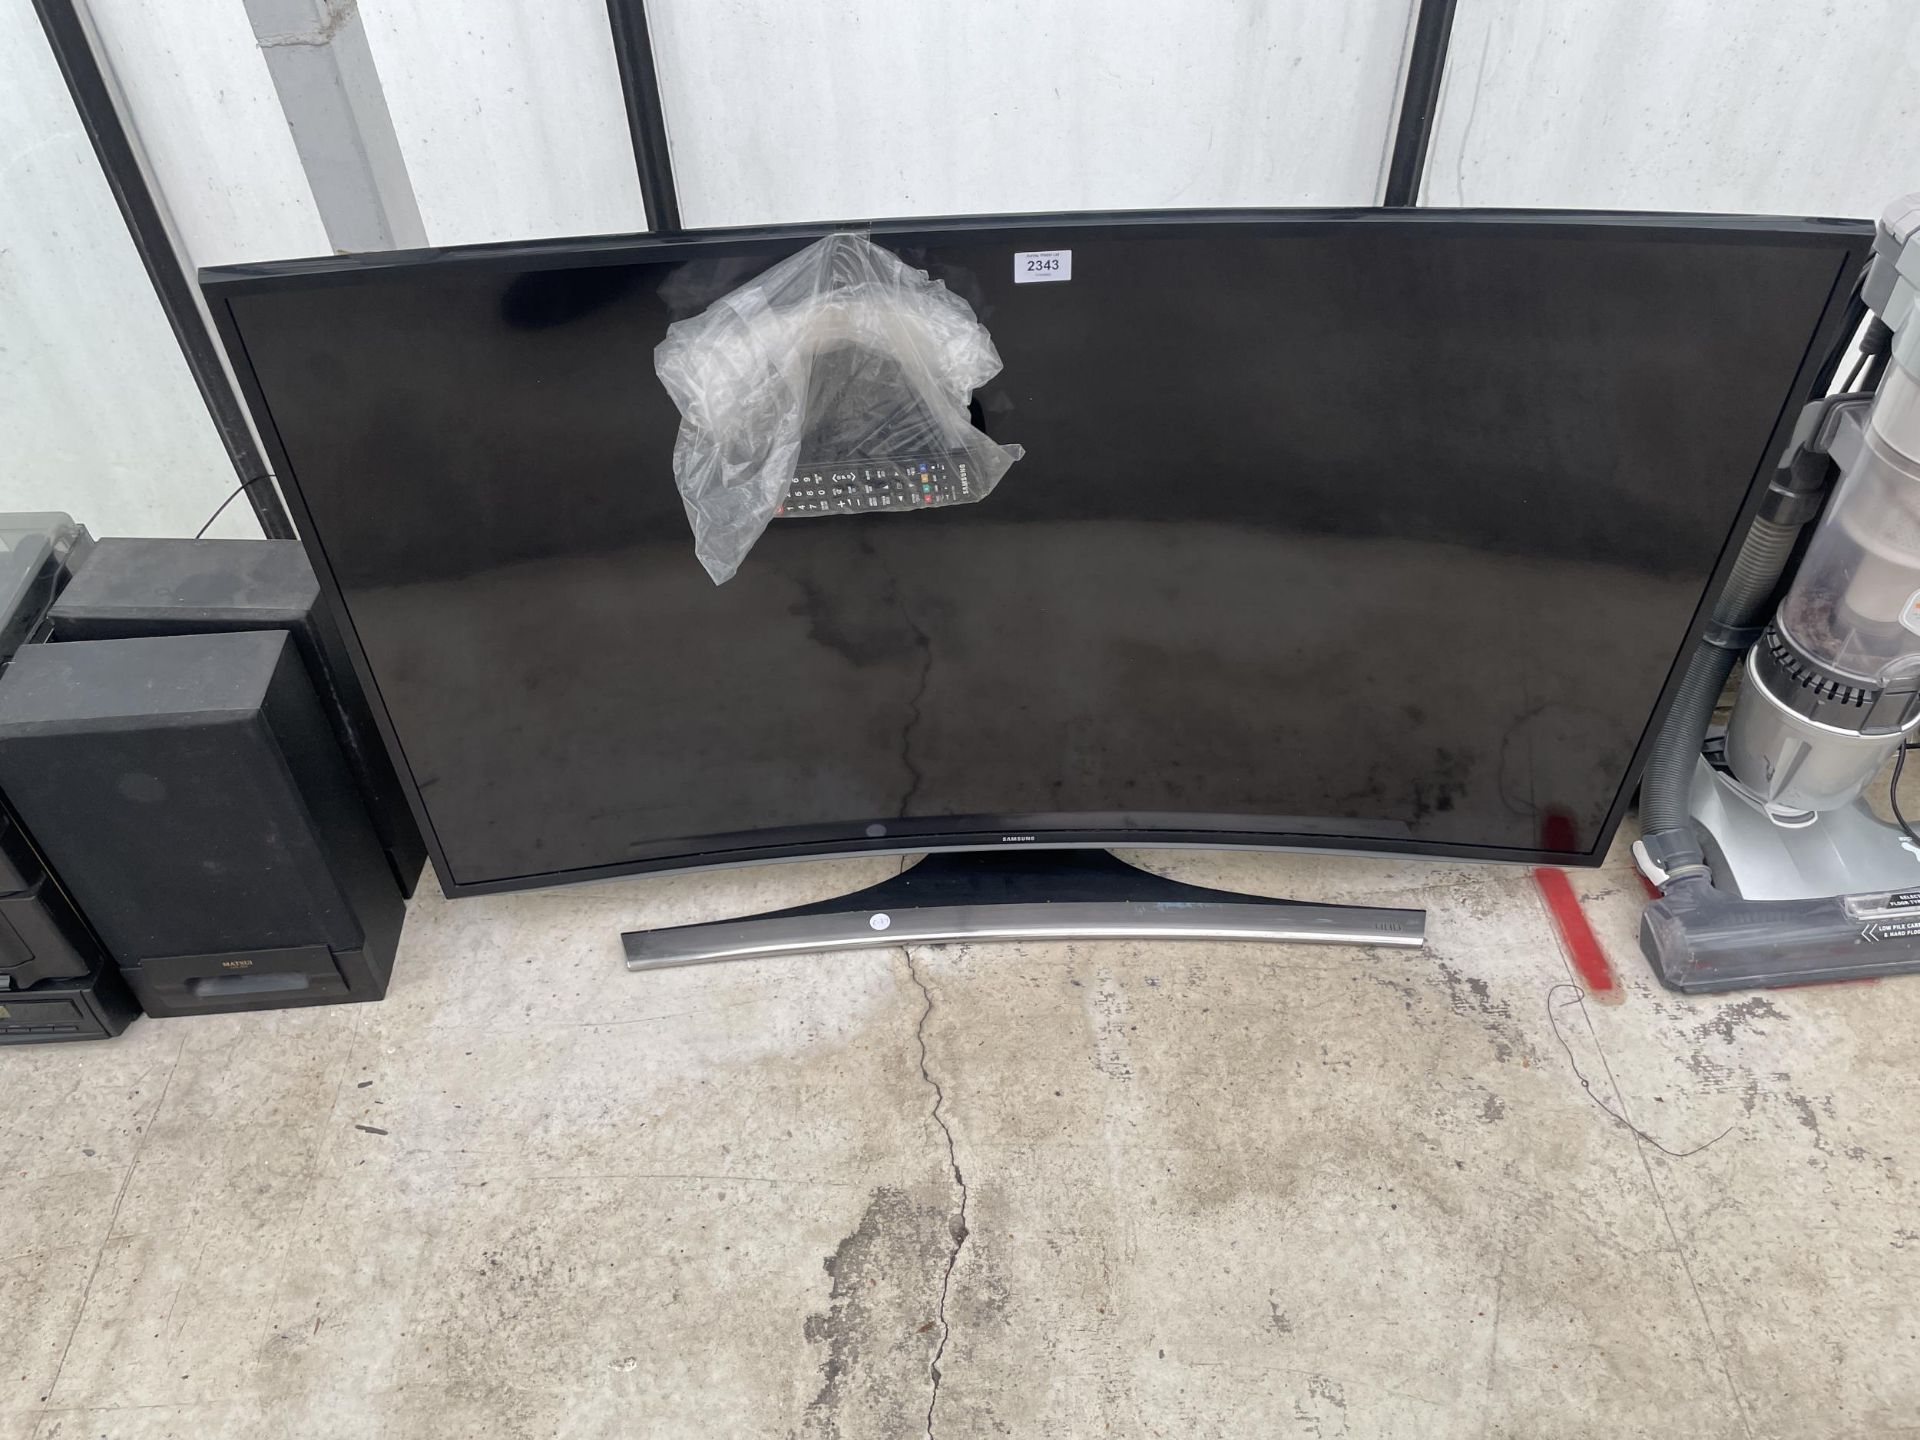 A SAMSUNG 48" CURVED TELEVISION WITH REMOTE CONTROL